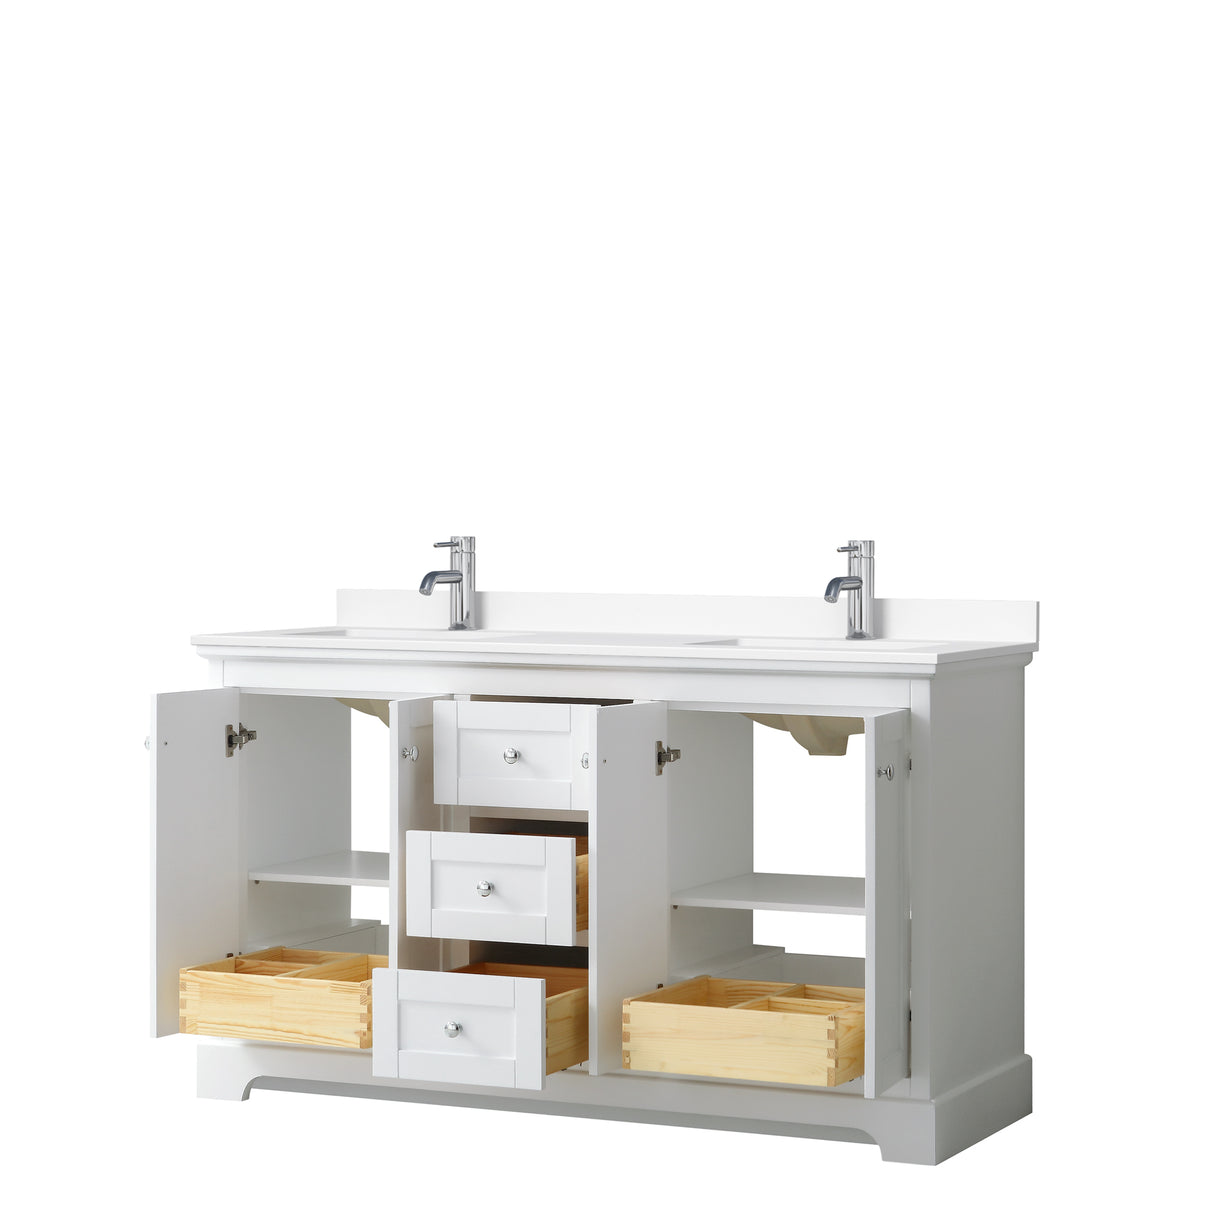 Avery 60 Inch Double Bathroom Vanity in White White Cultured Marble Countertop Undermount Square Sinks No Mirror